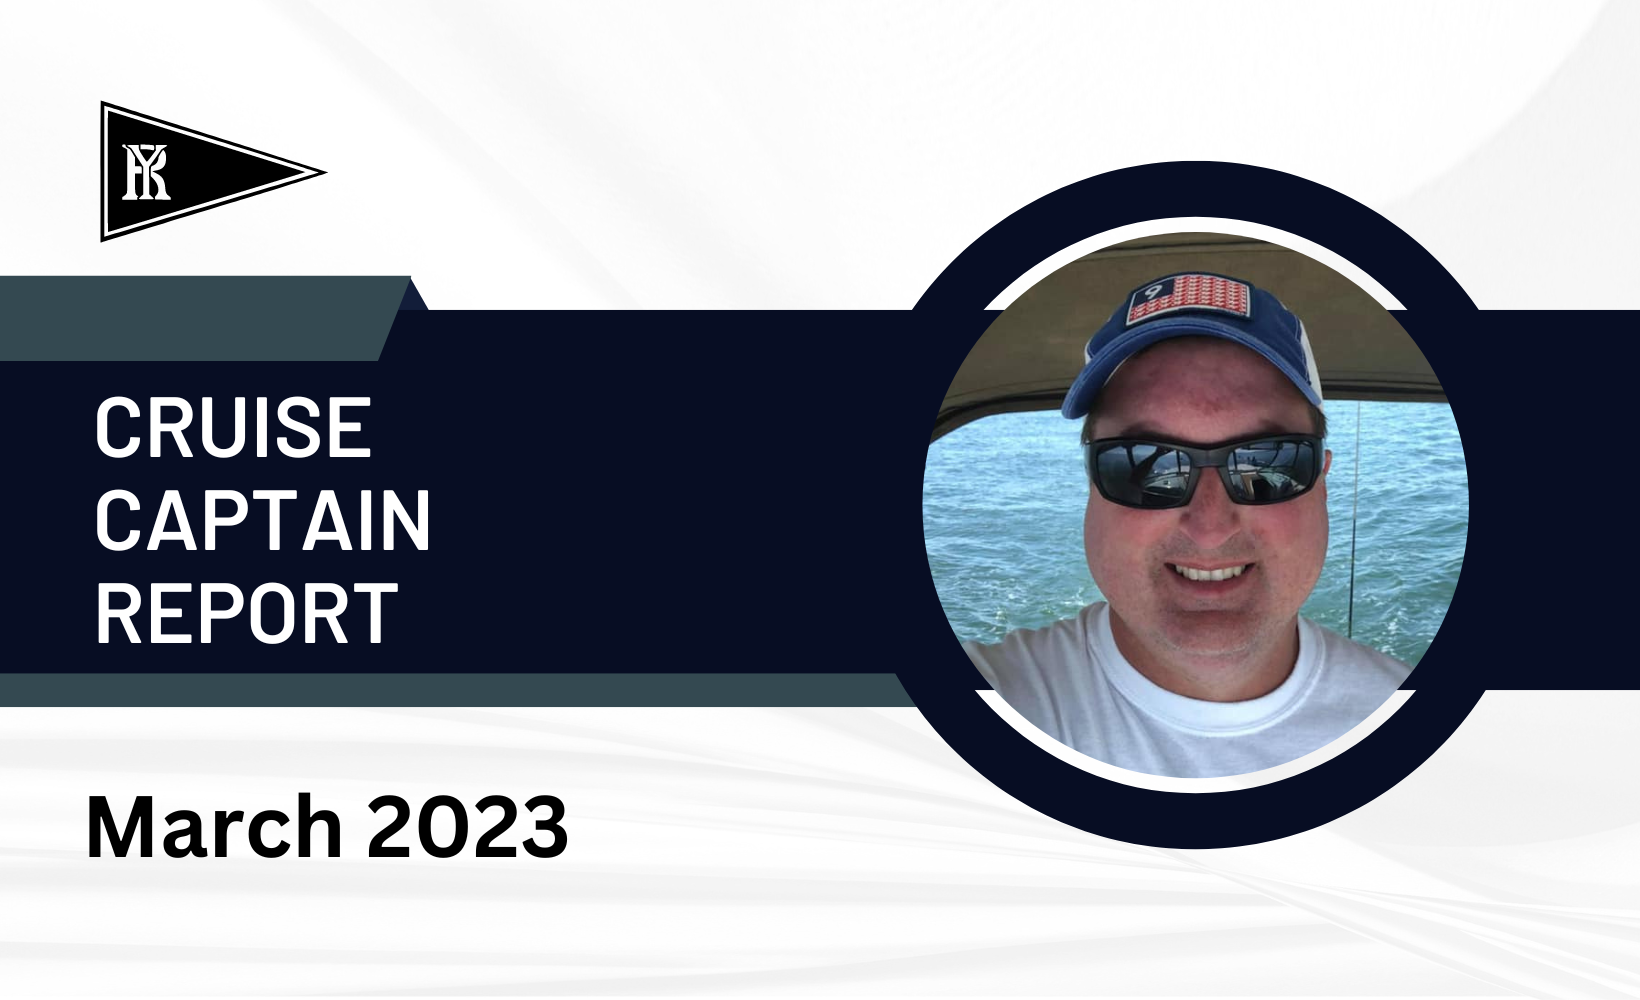 Cruise Captain Report - March 2023 Banner